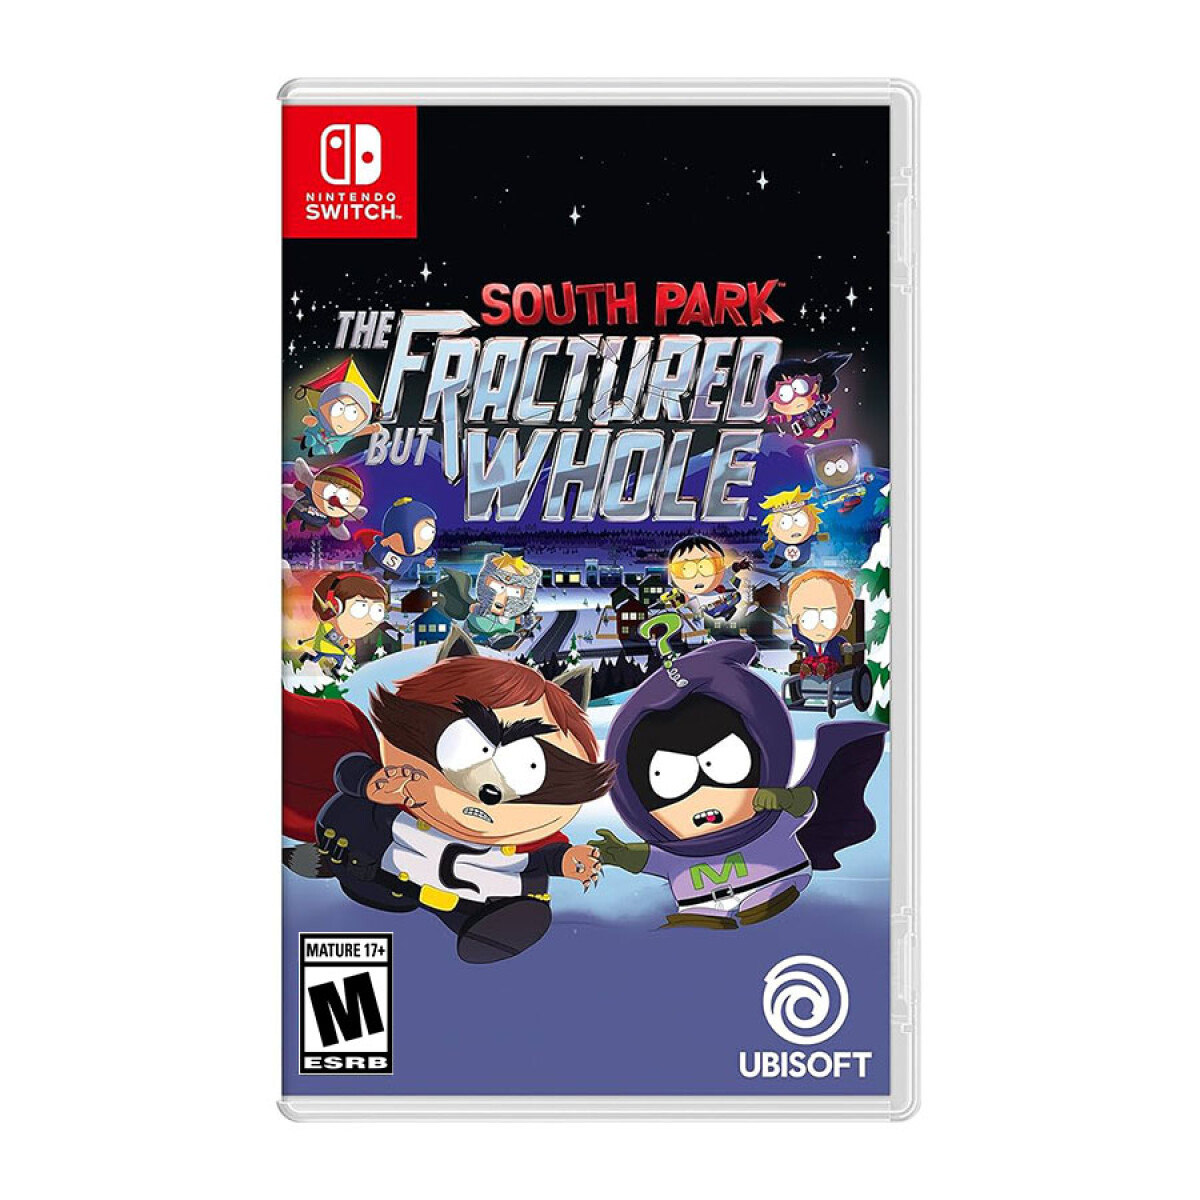 South Park: The Fractured But Whole - Nintendo Switch [Digital] 